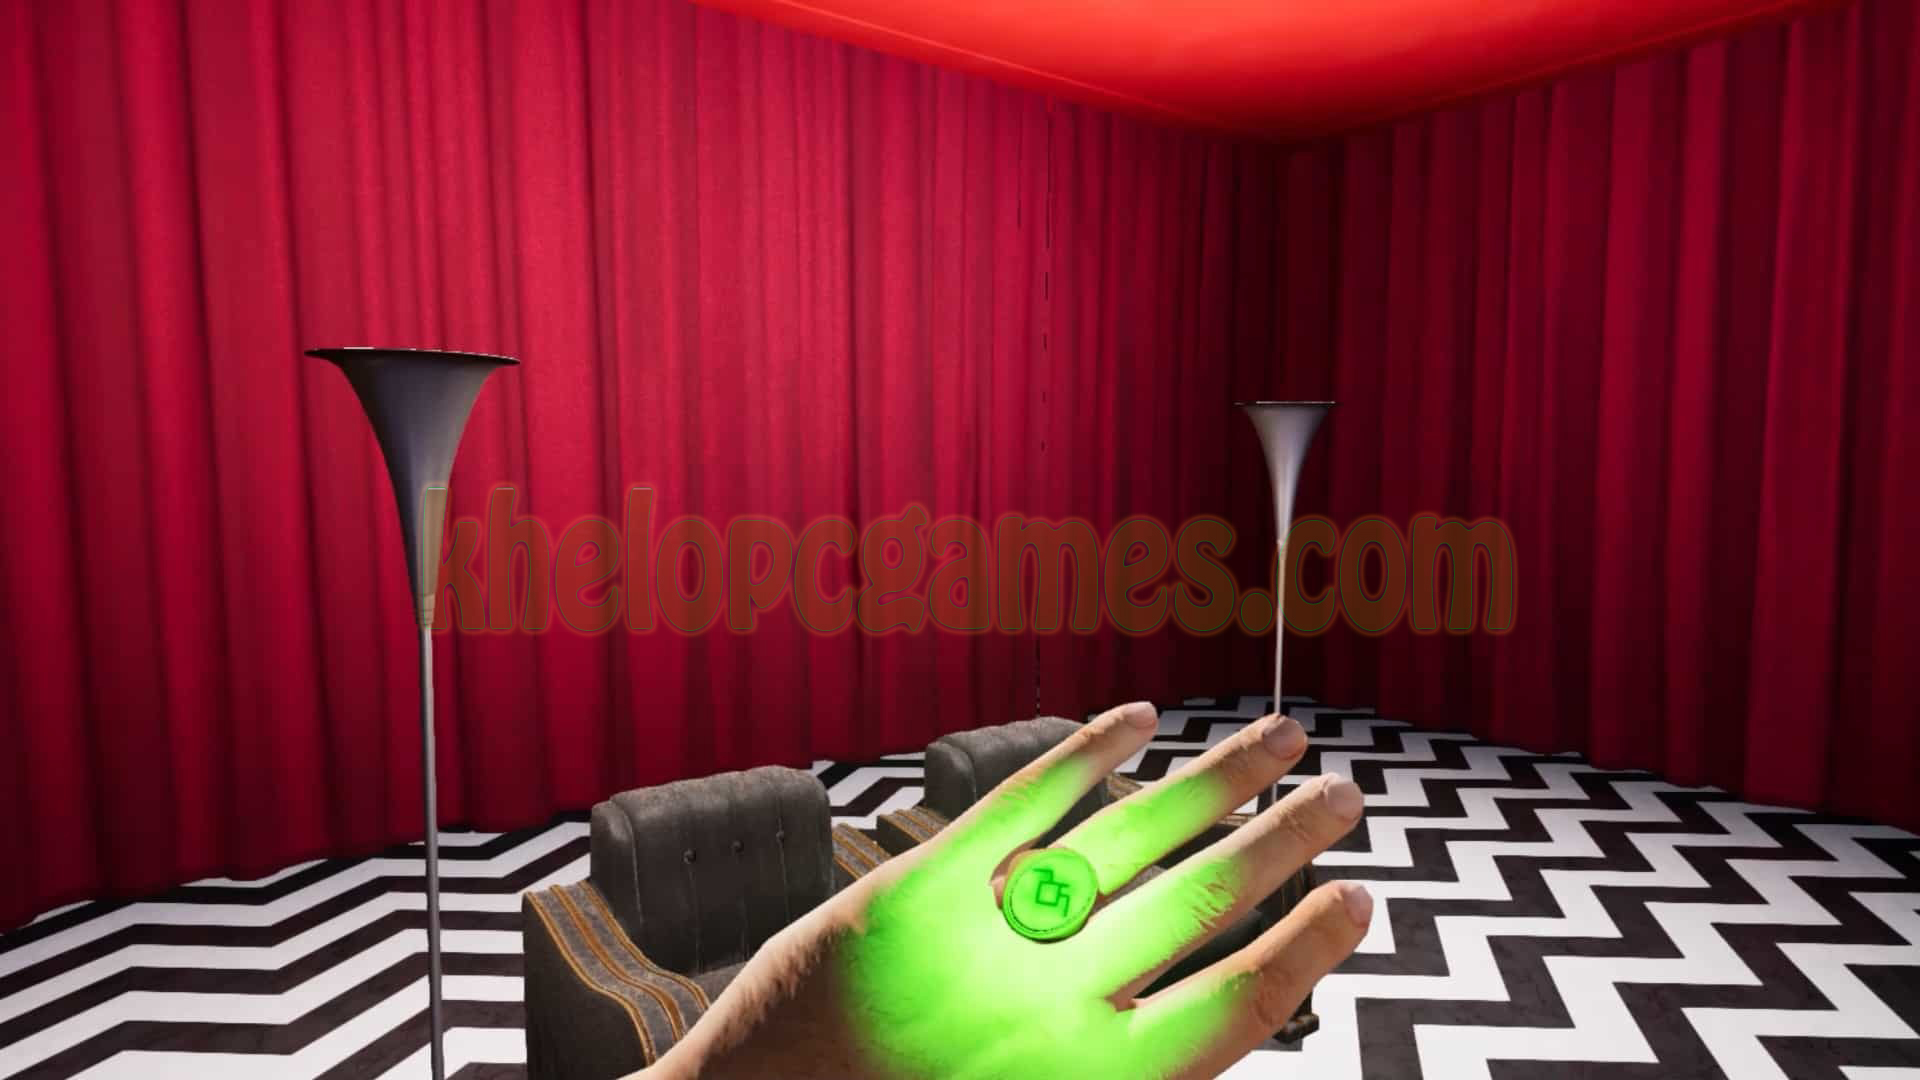 Twin Peaks VR PLAZA 2020 Pc Game Free Download